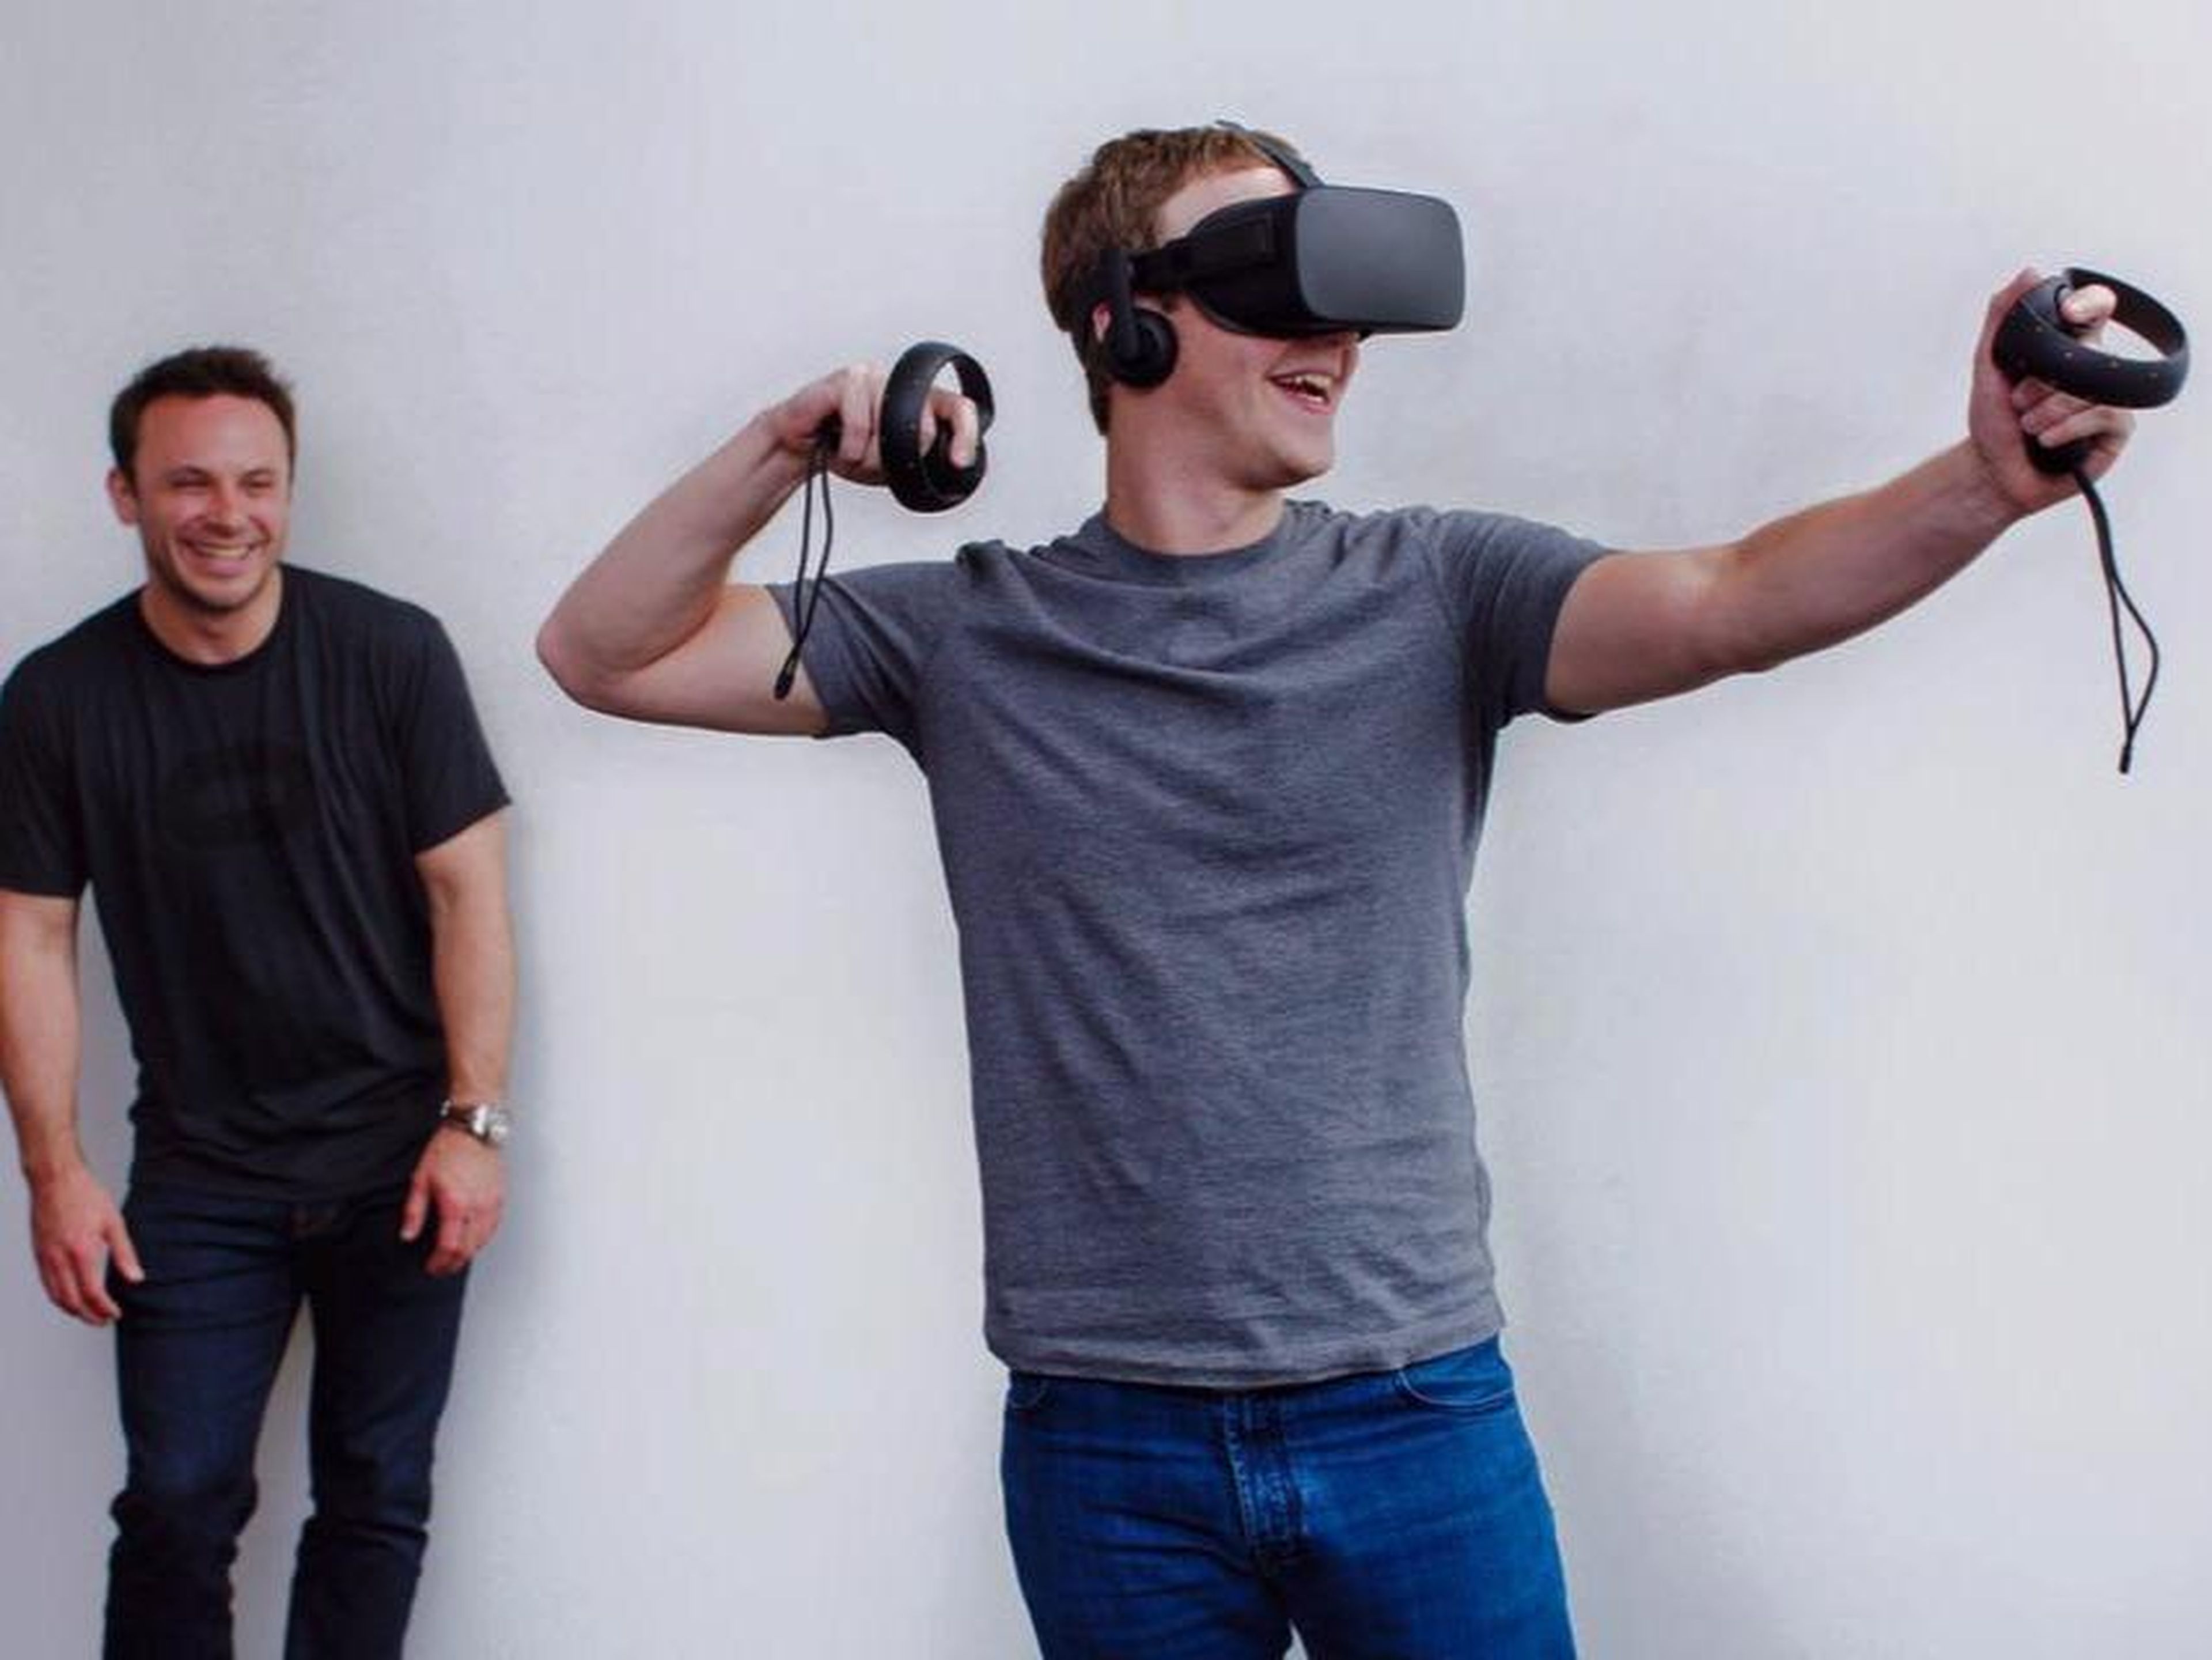 Facebook also acquired the VR company Oculus in March 2014 for $2 billion.